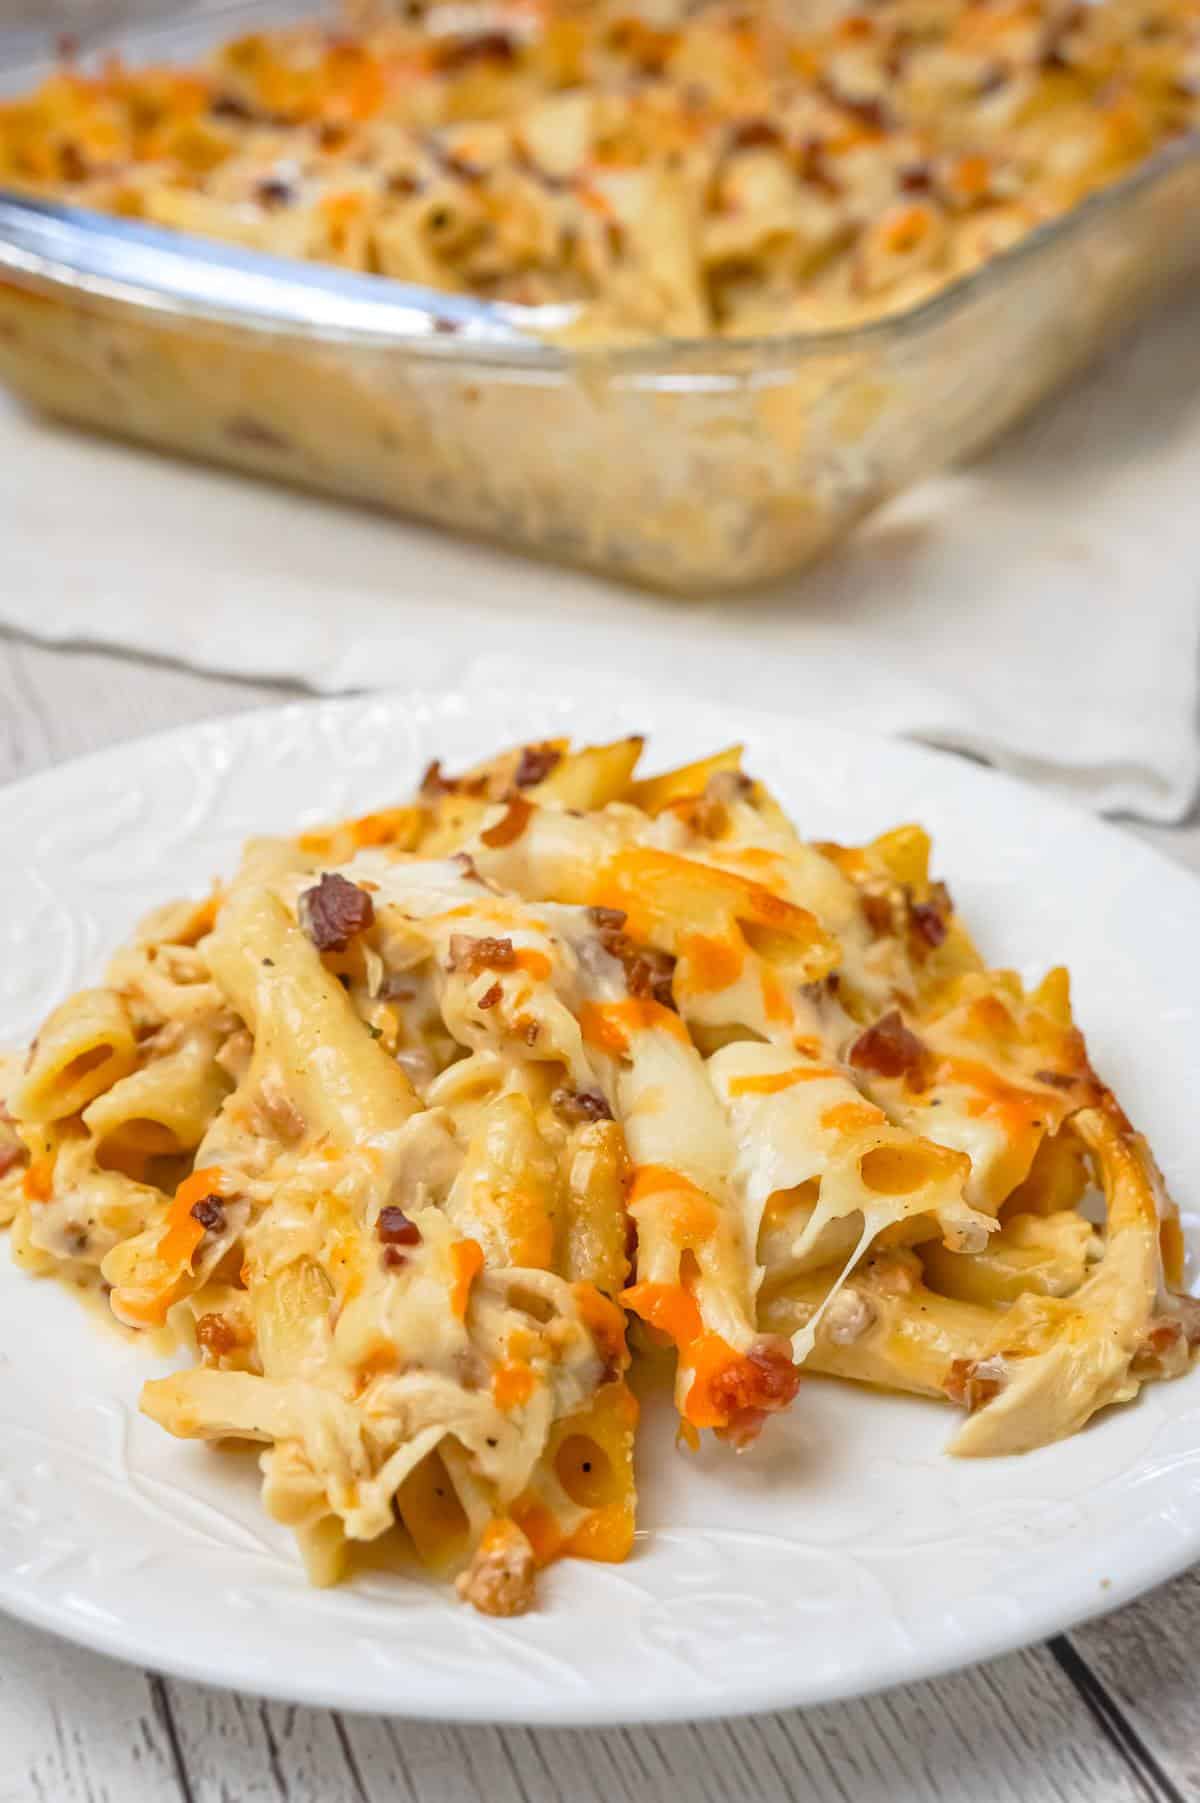 Cheddar Bacon Ranch Chicken Pasta is a delicious baked pasta recipe loaded with crumbled bacon, shredded chicken and cheddar cheese all in a creamy sauce made with cheddar cheese soup, cream of bacon soup and ranch dip mix.